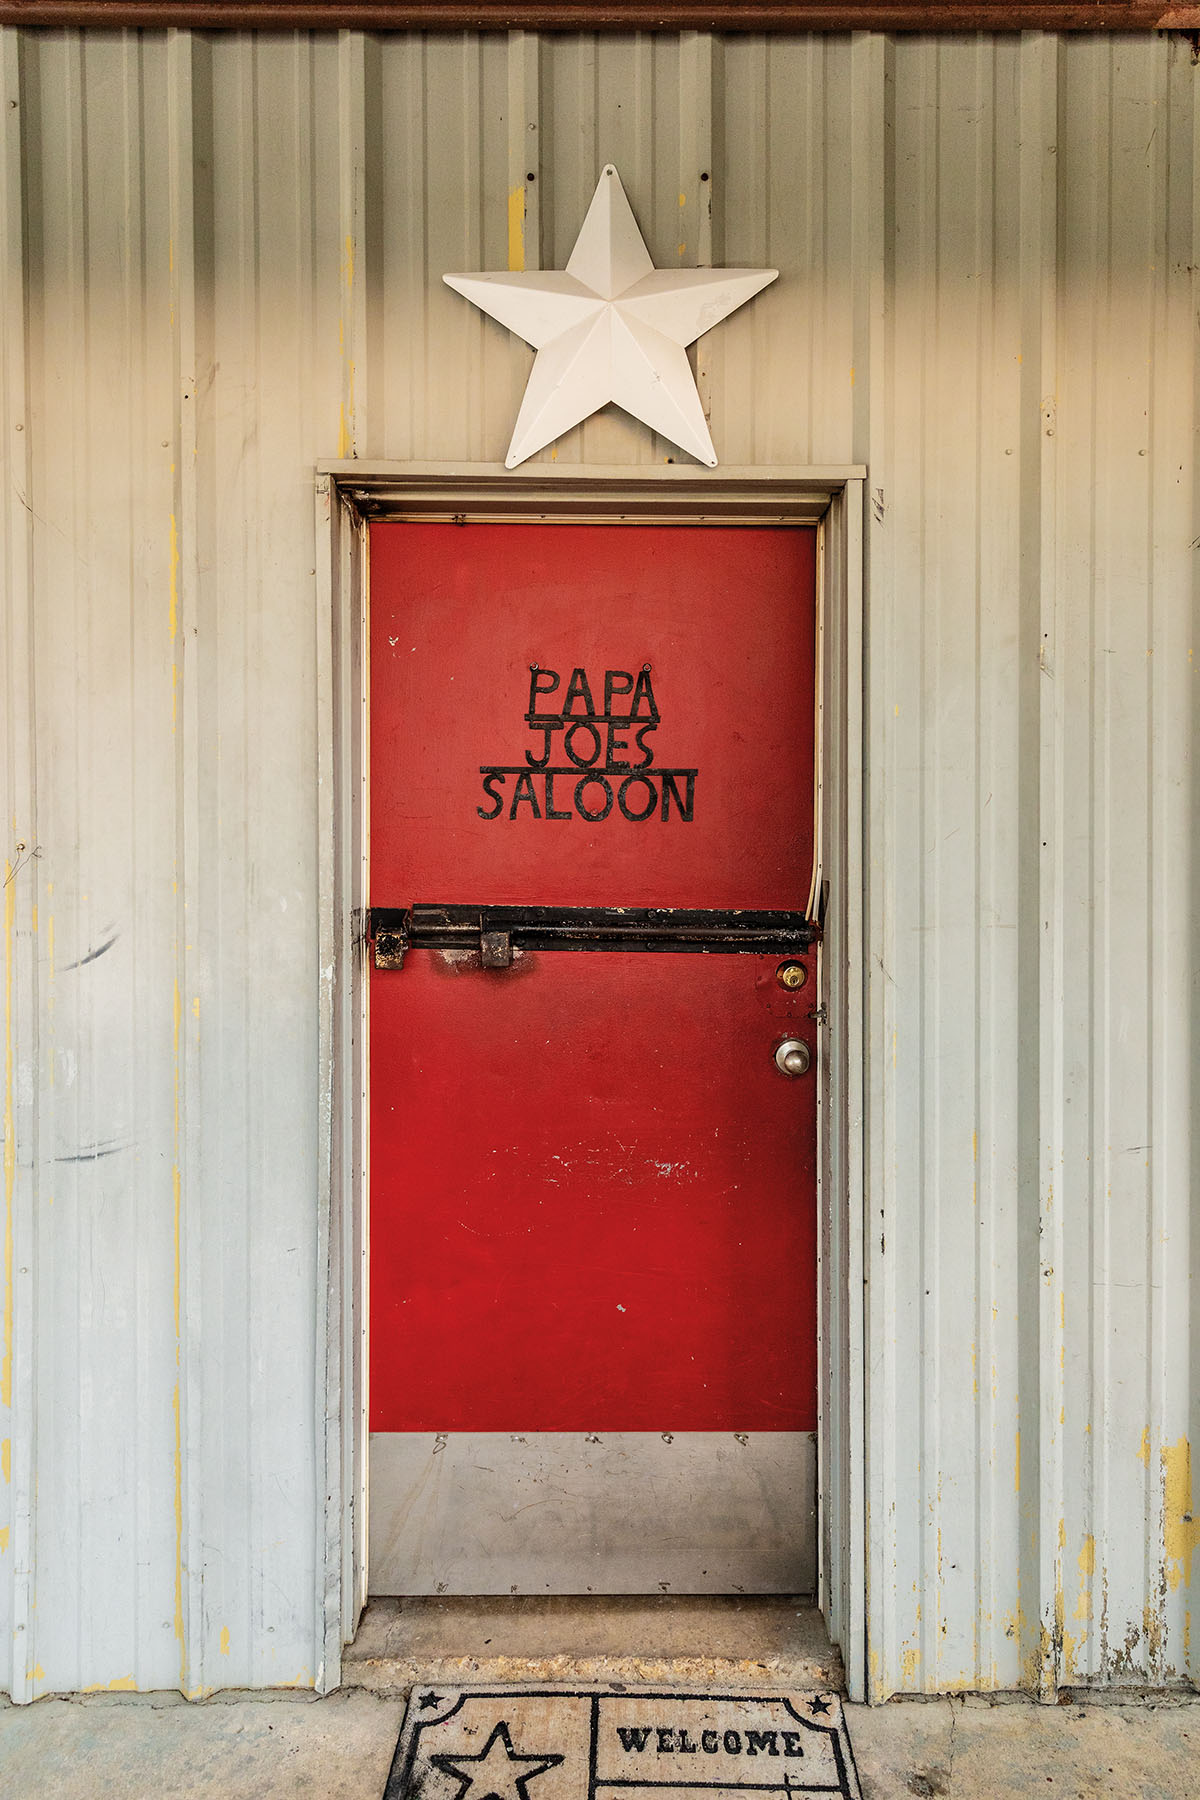 The exterior of a metal building with a red door reading "Papa Joe's Saloon"